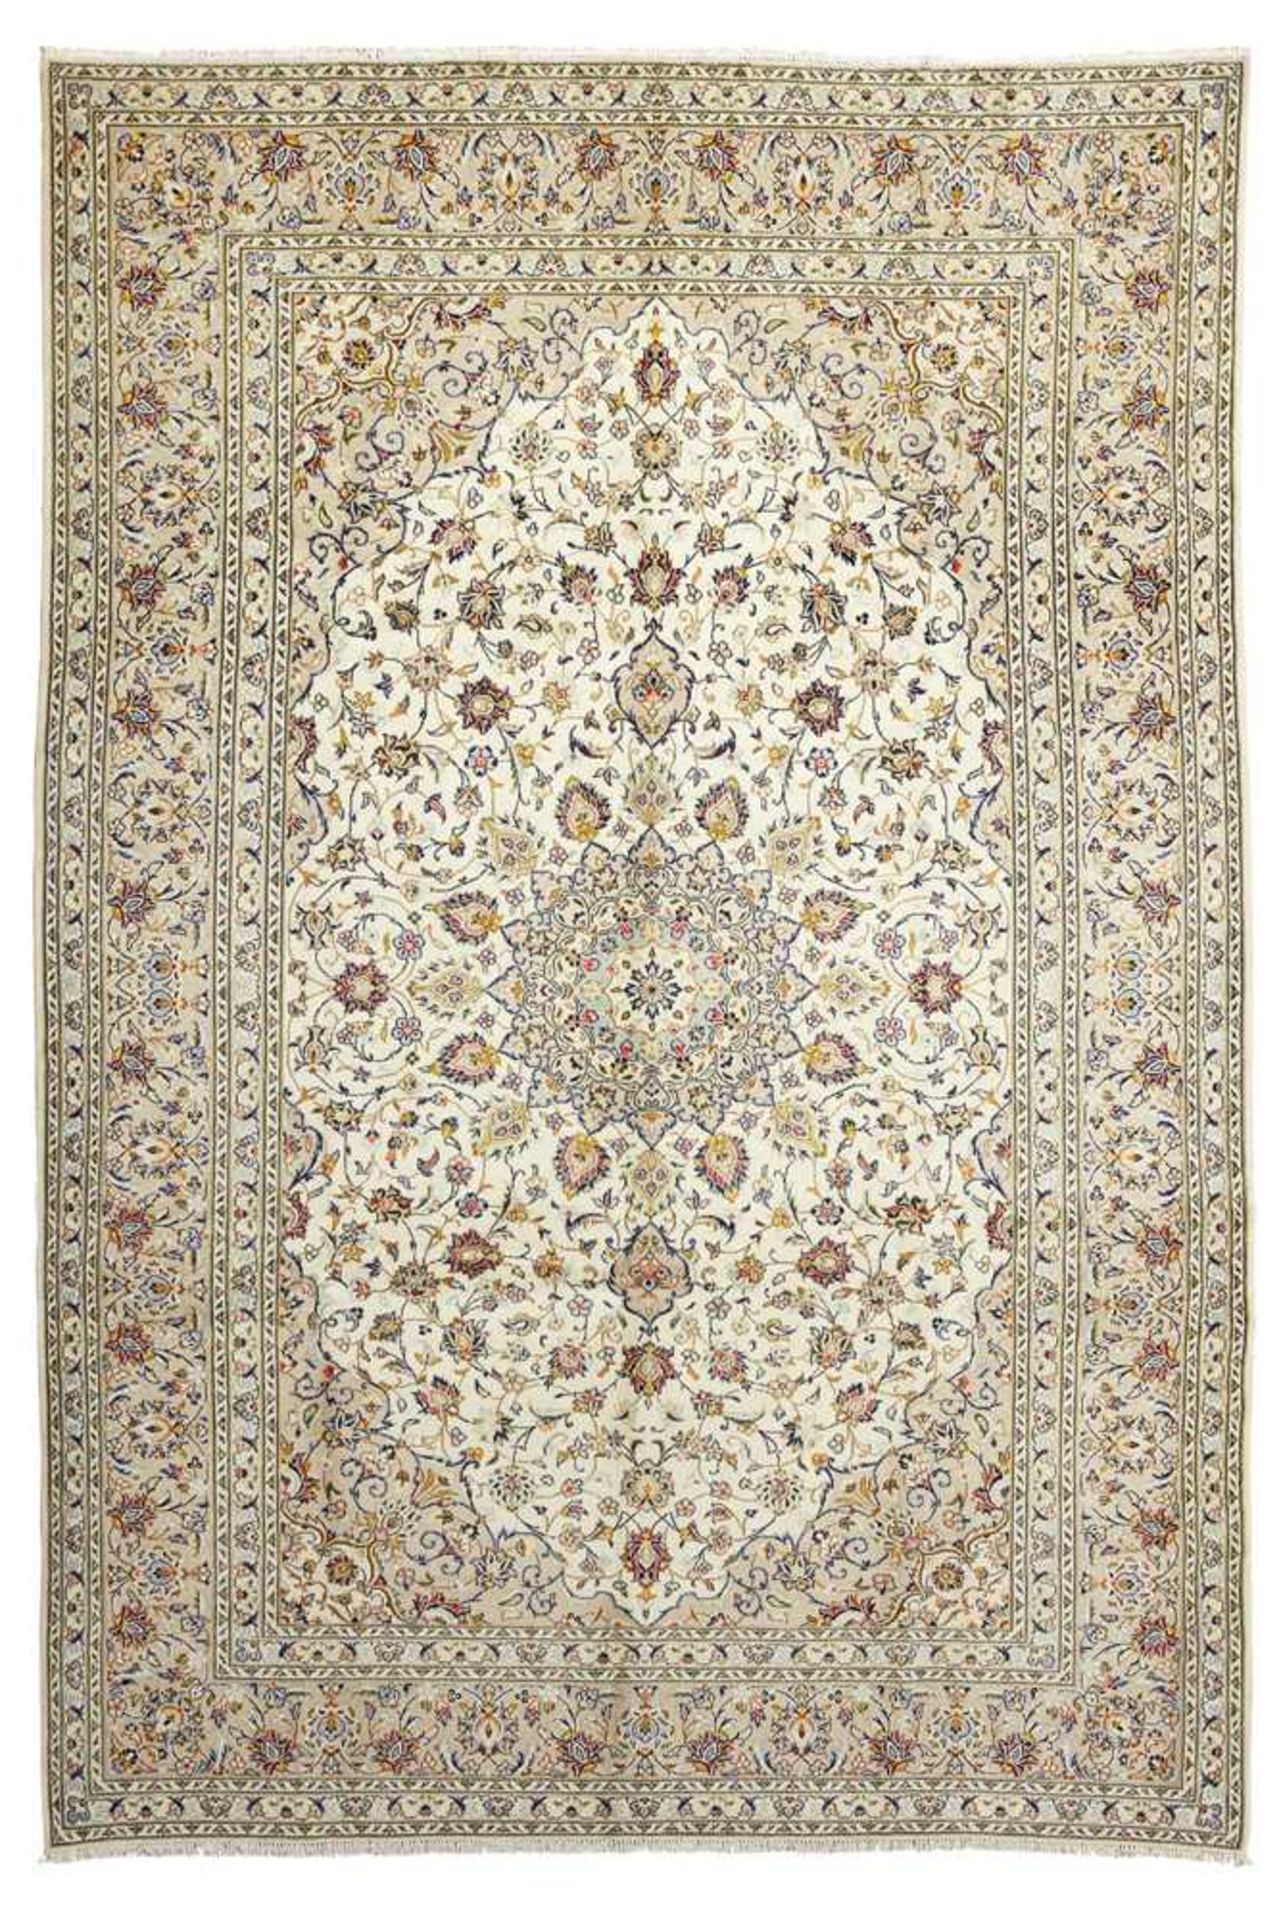 KASHAN CARPET CENTRAL PERSIA, LATE 20TH CENTURY